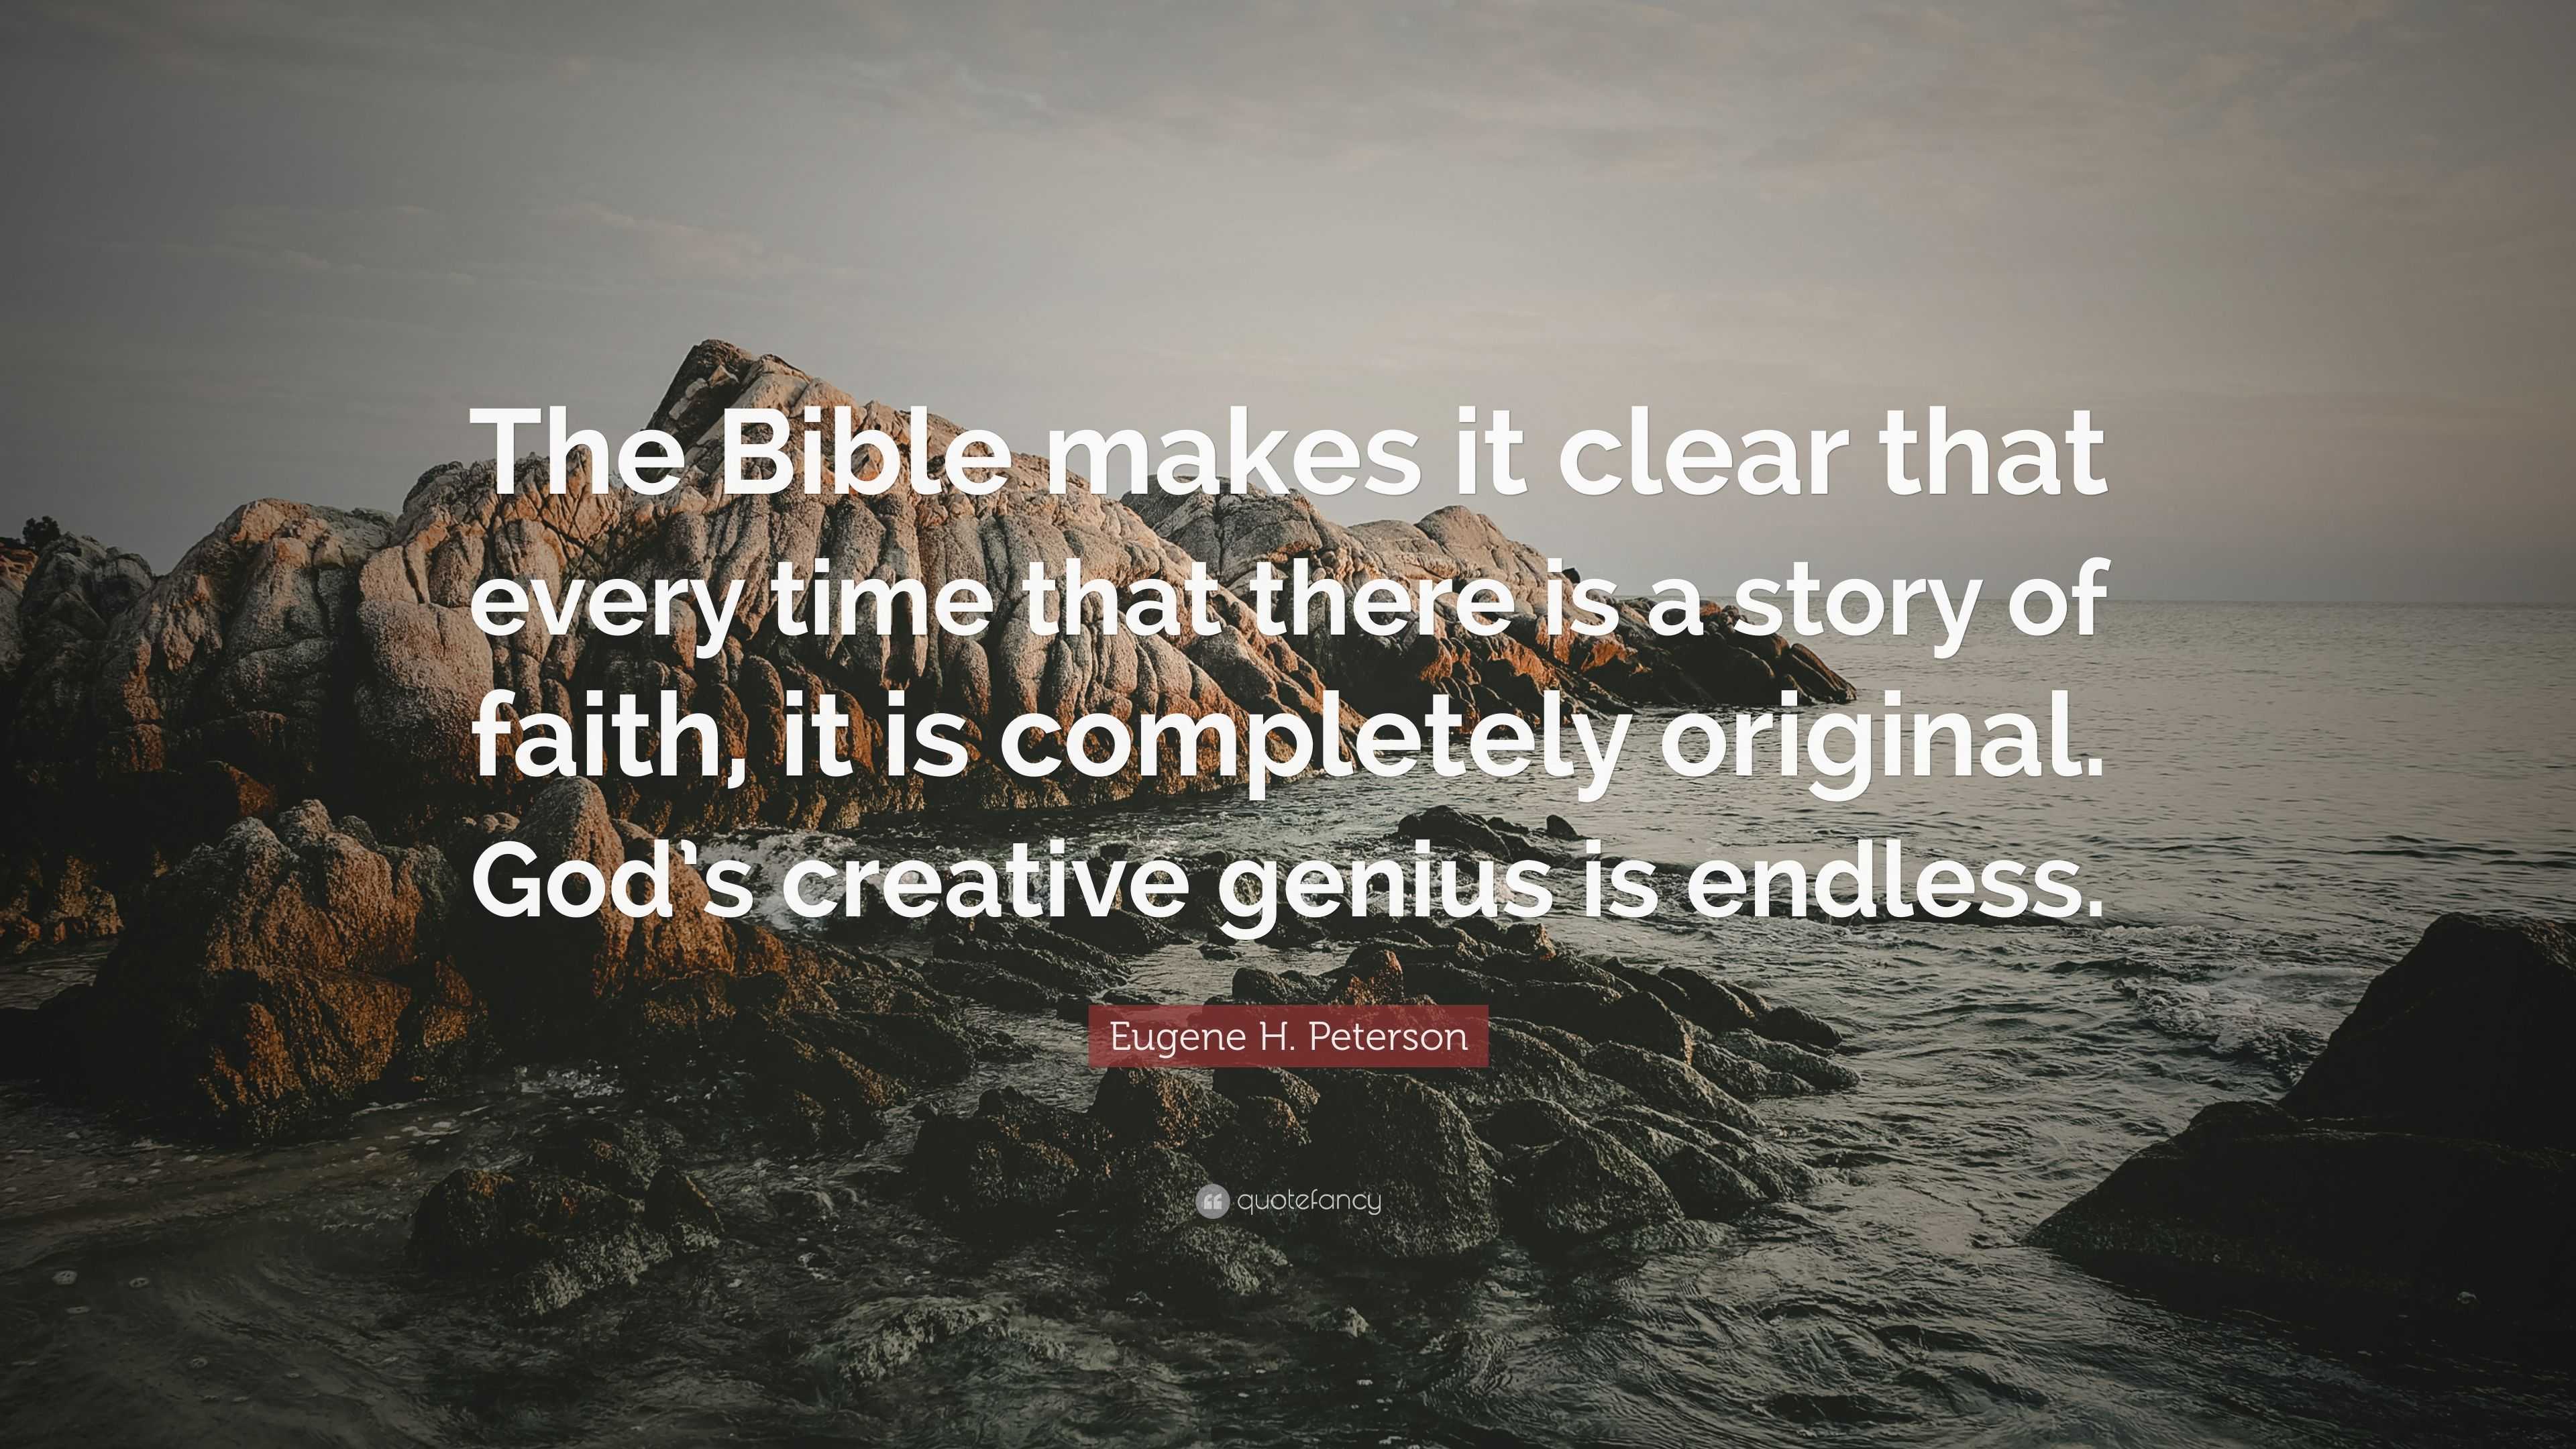 Eugene H. Peterson Quote: “The Bible makes it clear that every time ...